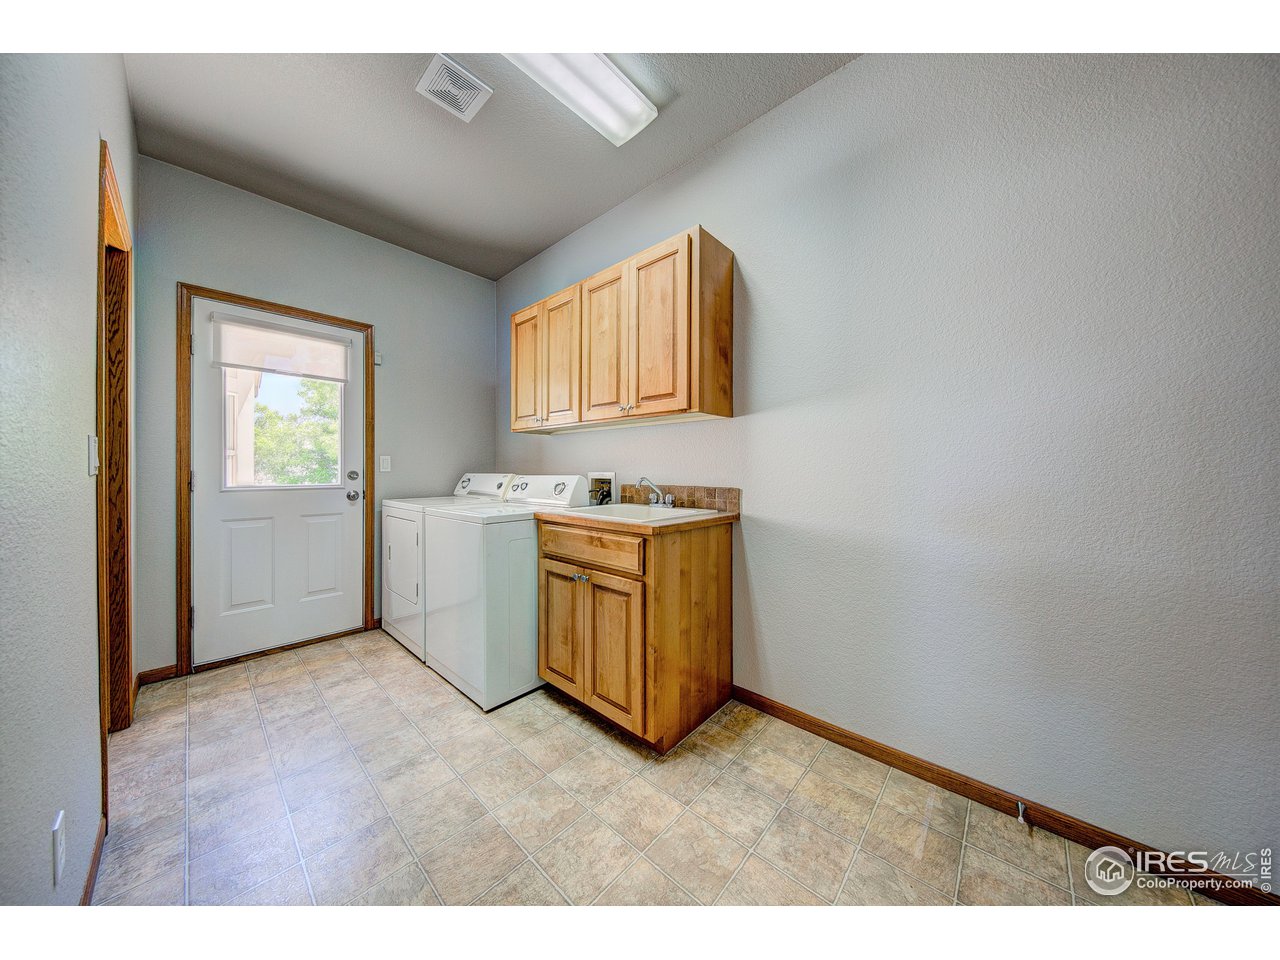 Laundry Room with Cabinets and Laundry Tub